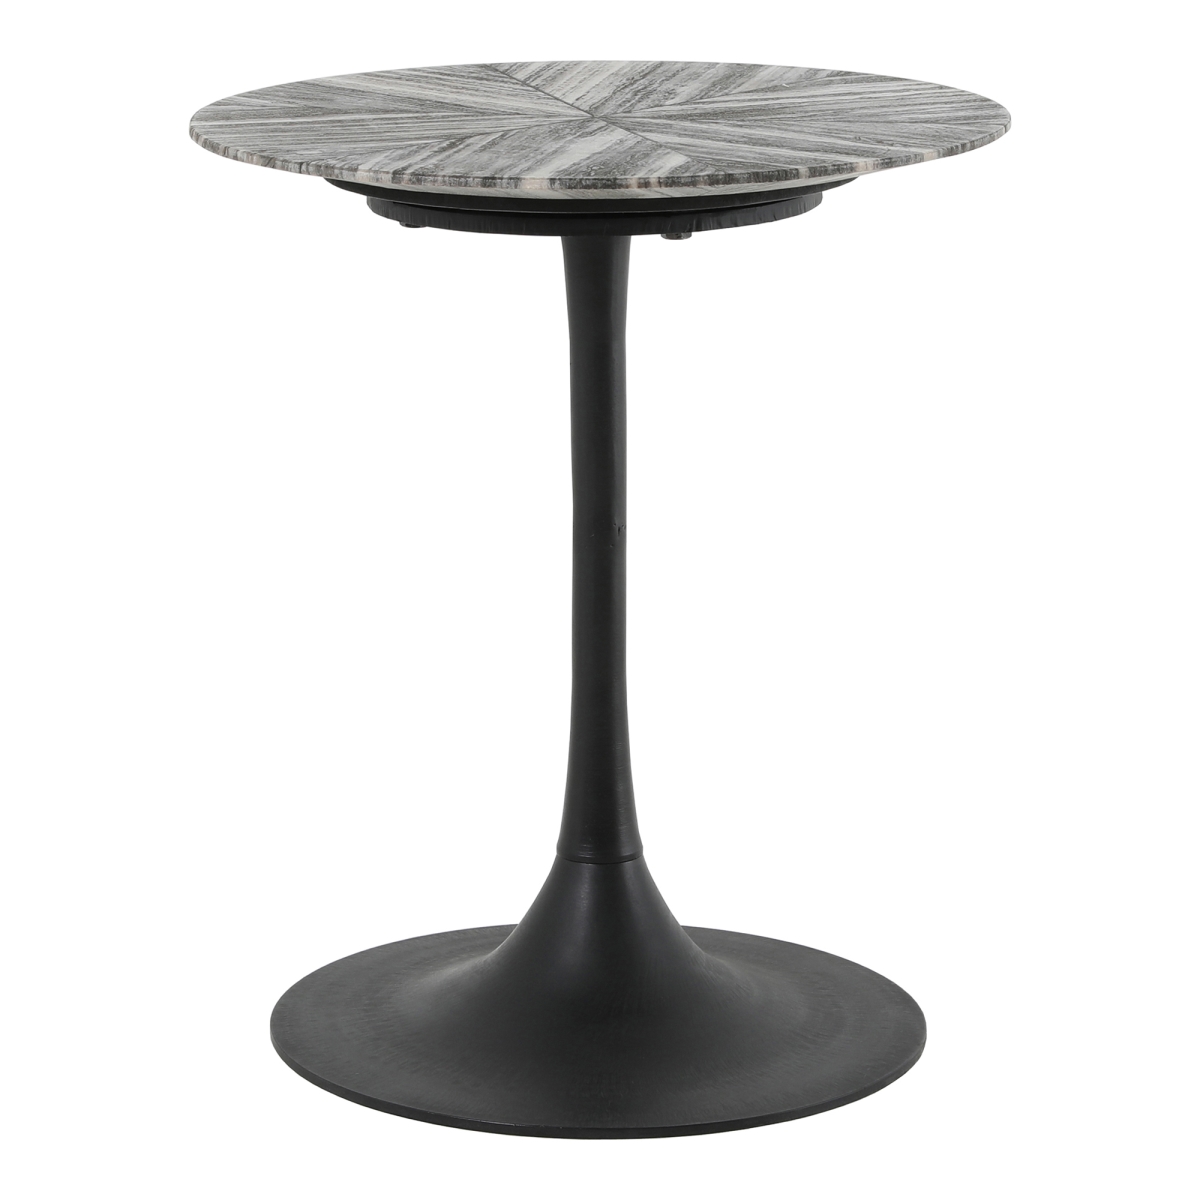 Gk-1006-37 Nyles Marble Accent Table - 18 X 18 X 21 In.